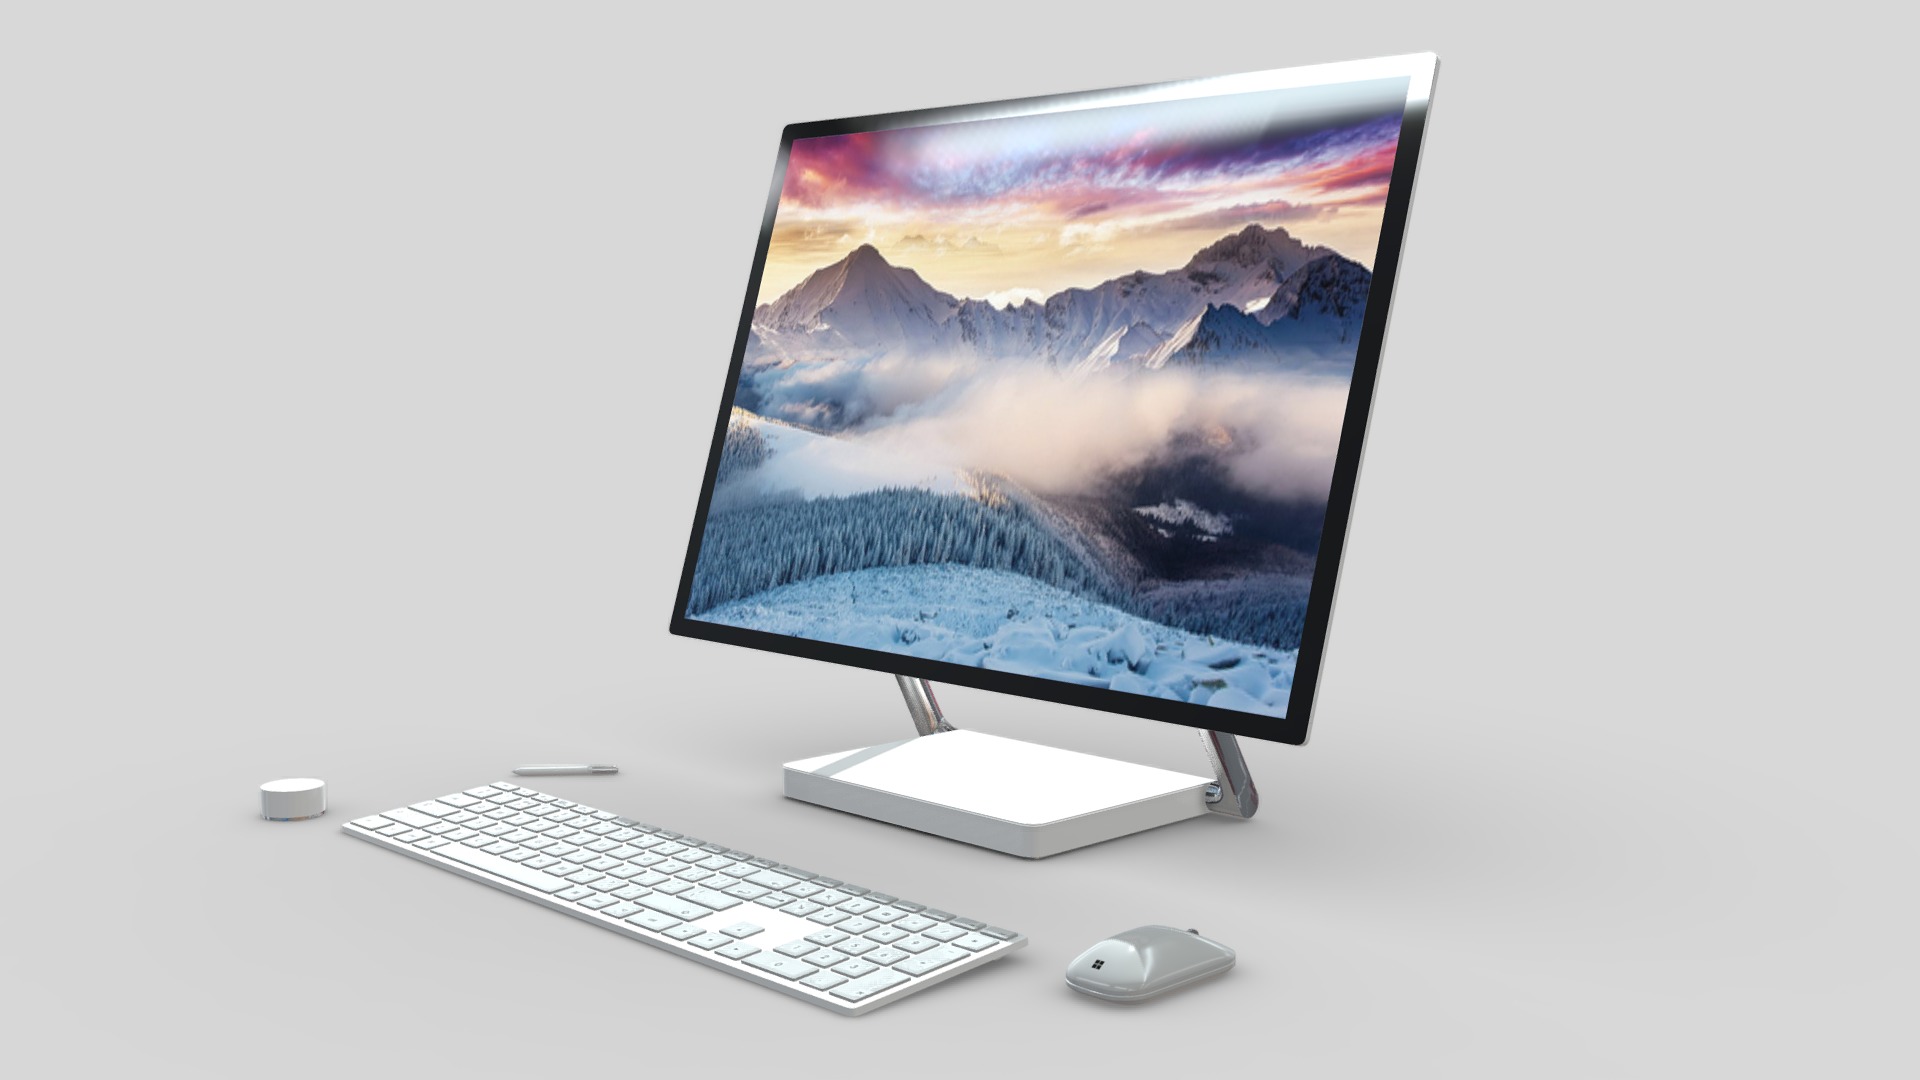 3D model Microsoft Surface Studio - This is a 3D model of the Microsoft Surface Studio. The 3D model is about a computer monitor and keyboard.